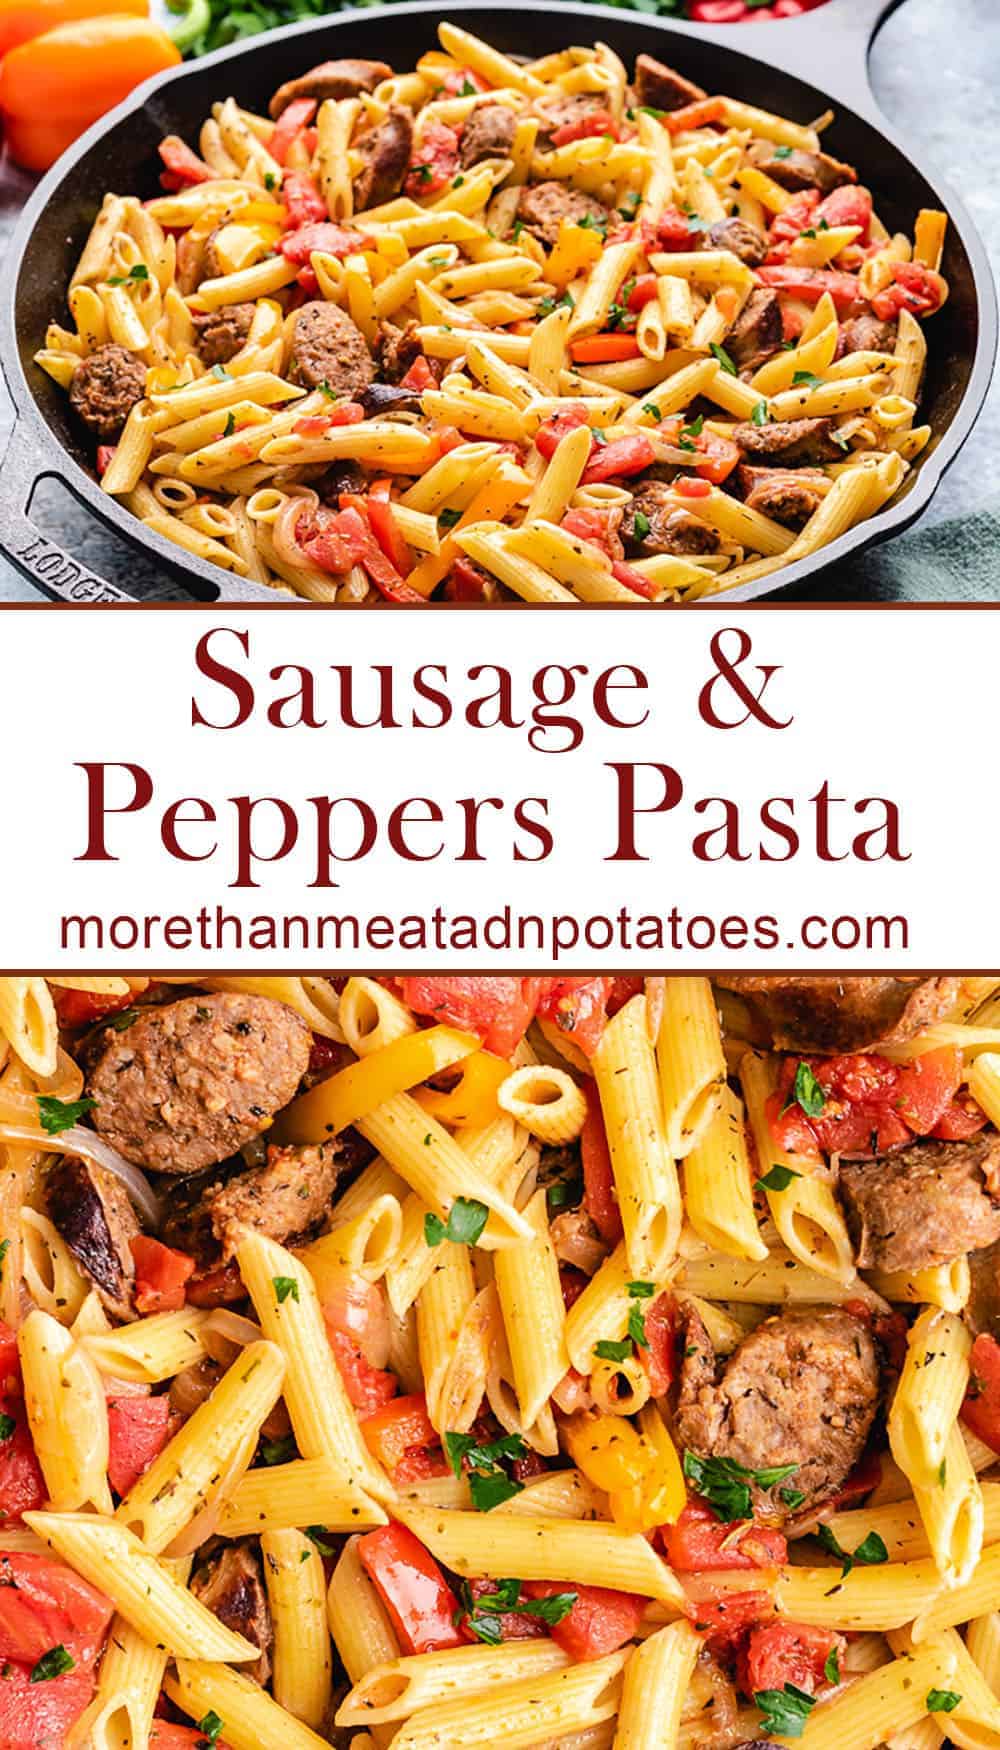 Sausage and Peppers Pasta